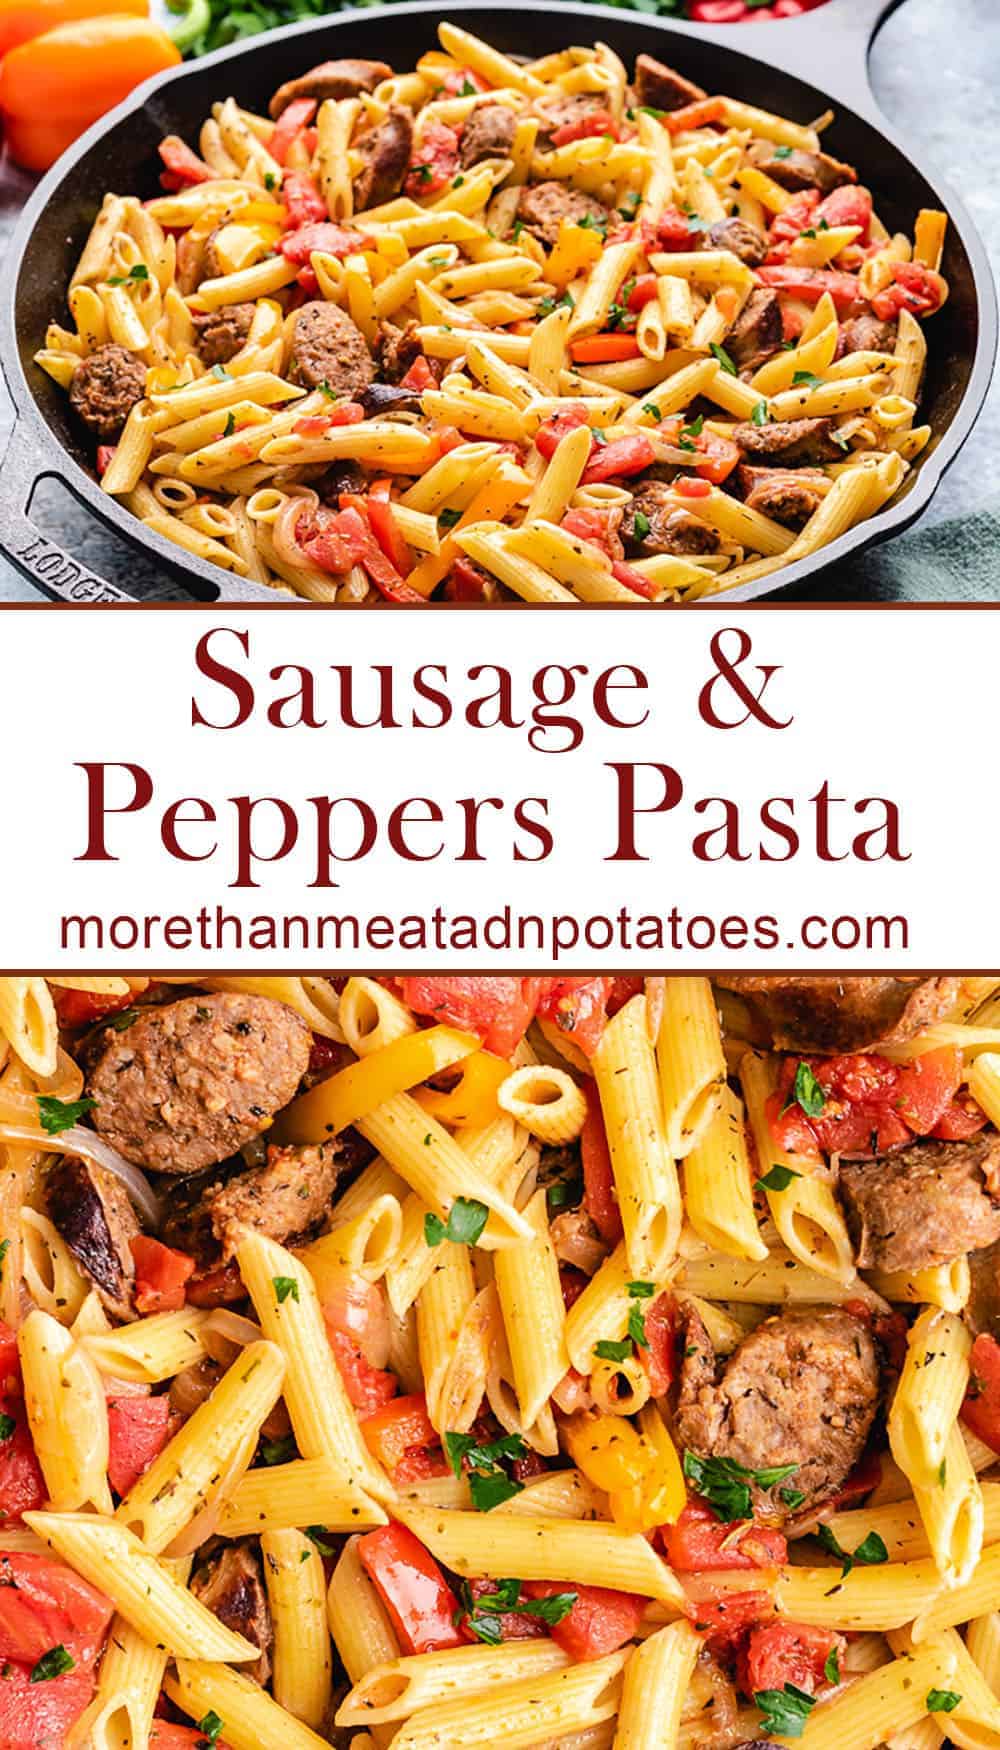 Sausage and Peppers Pasta